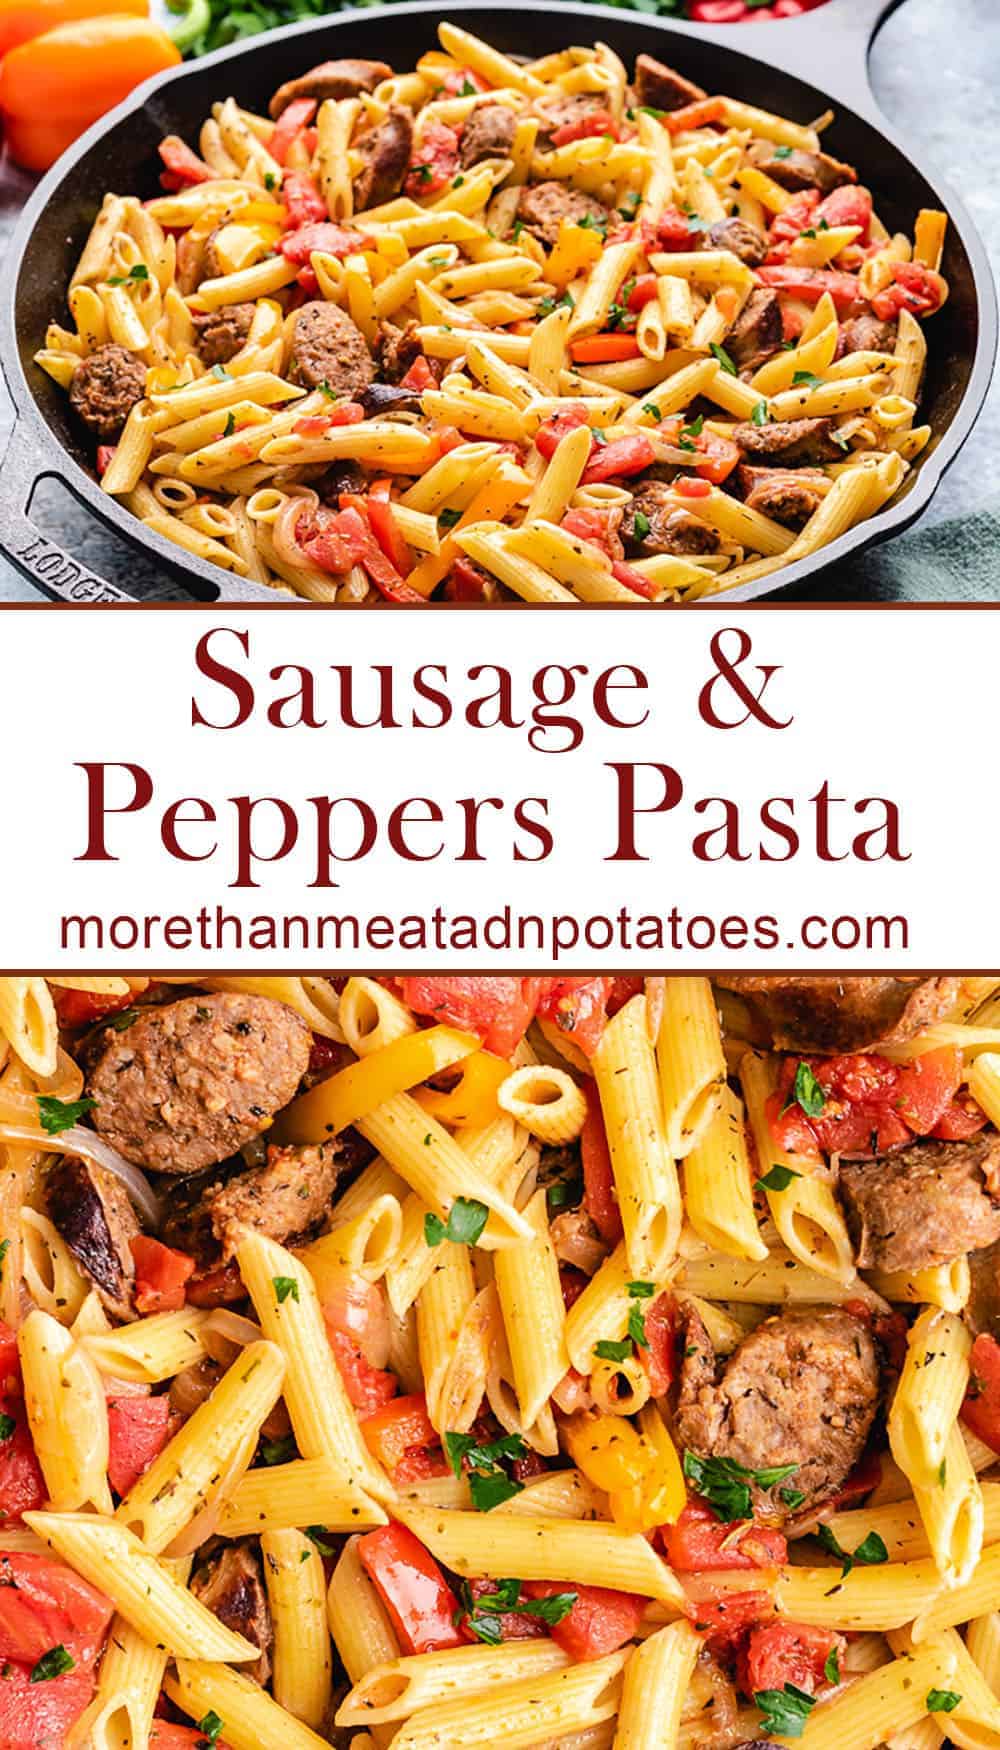 Sausage and Peppers Pasta